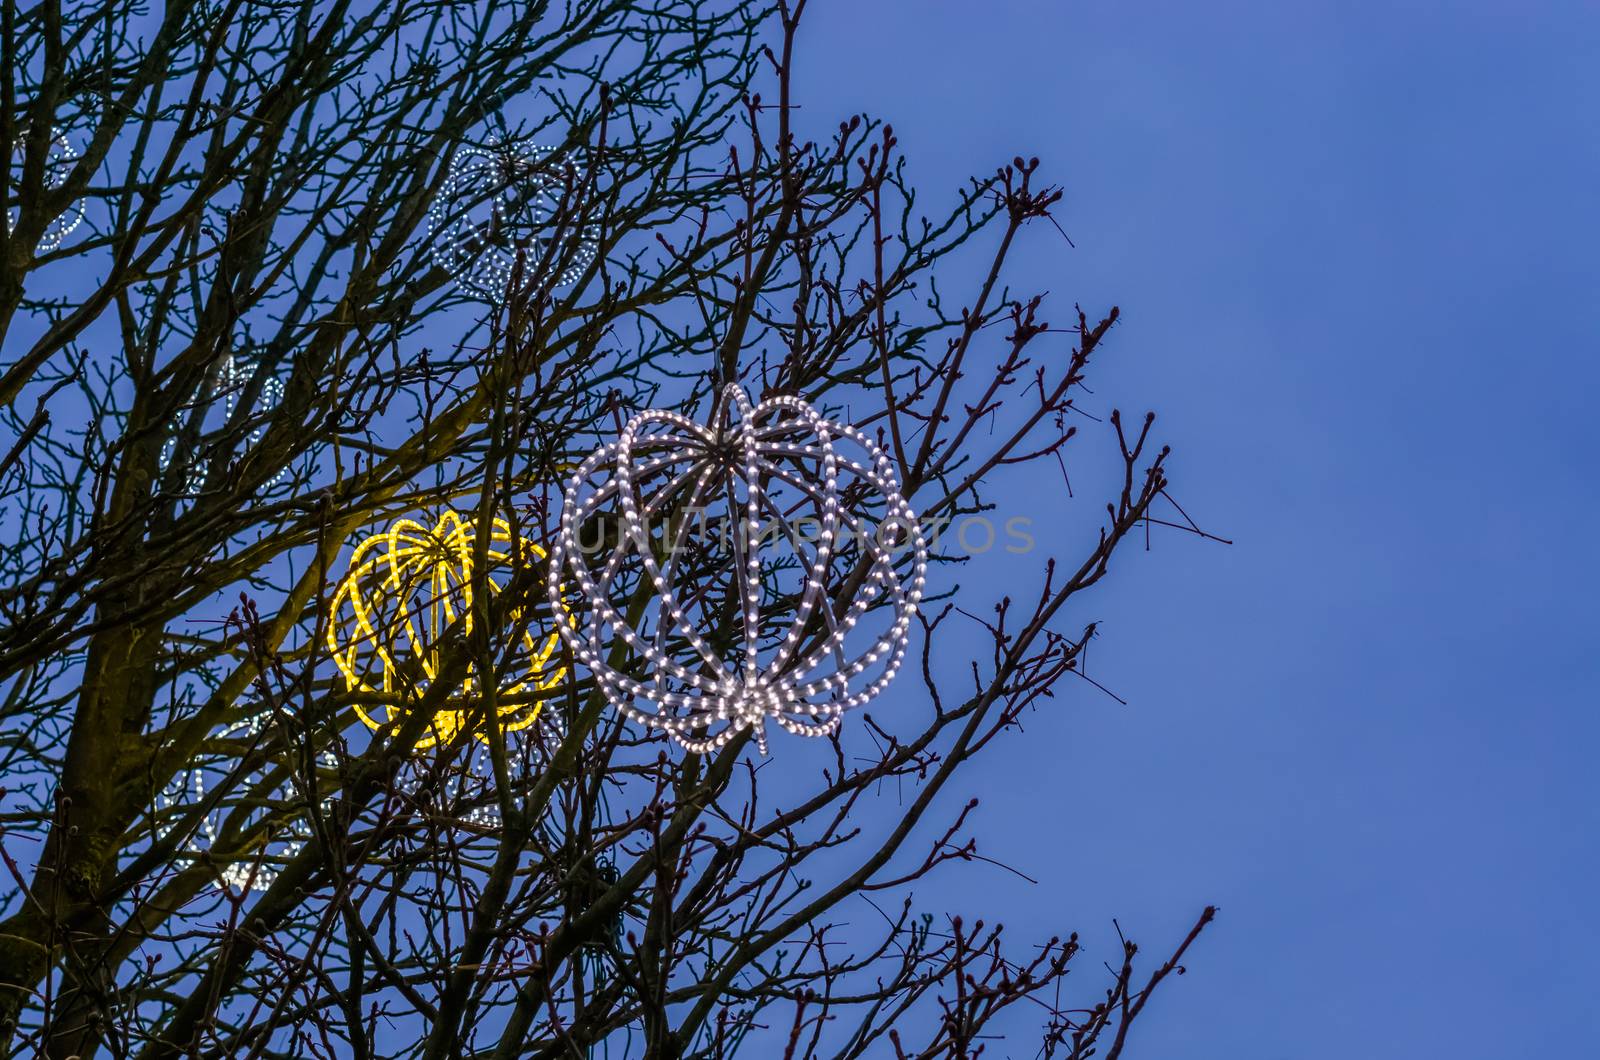 lighted led spheres hanging in the trees, beautiful outdoor winter decorations